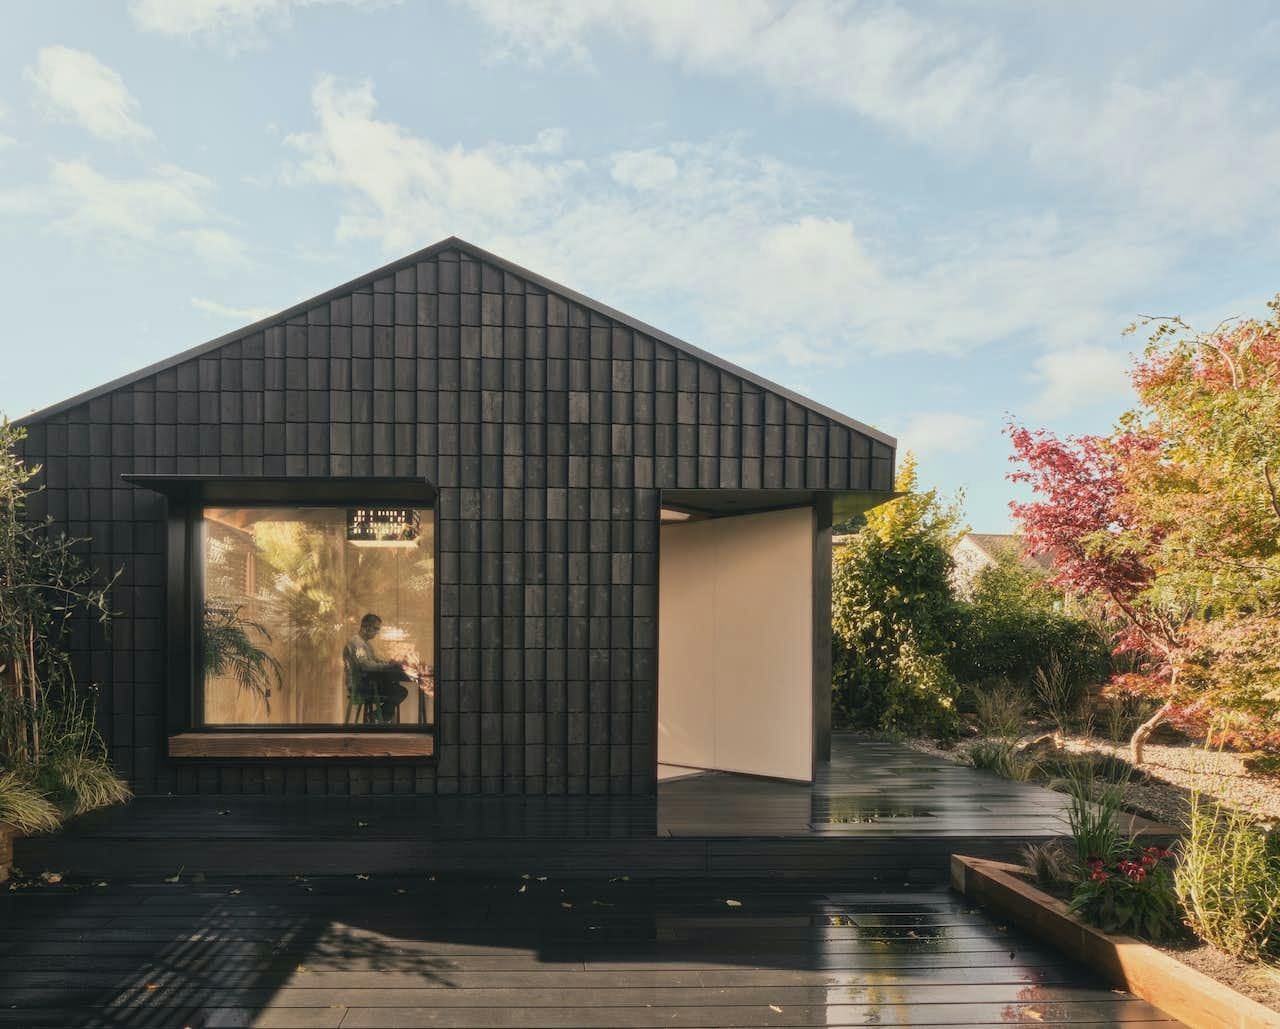 This Garden Studio Wrapped in Charred Timber Shingles Acts Like a Giant Bug Hotel